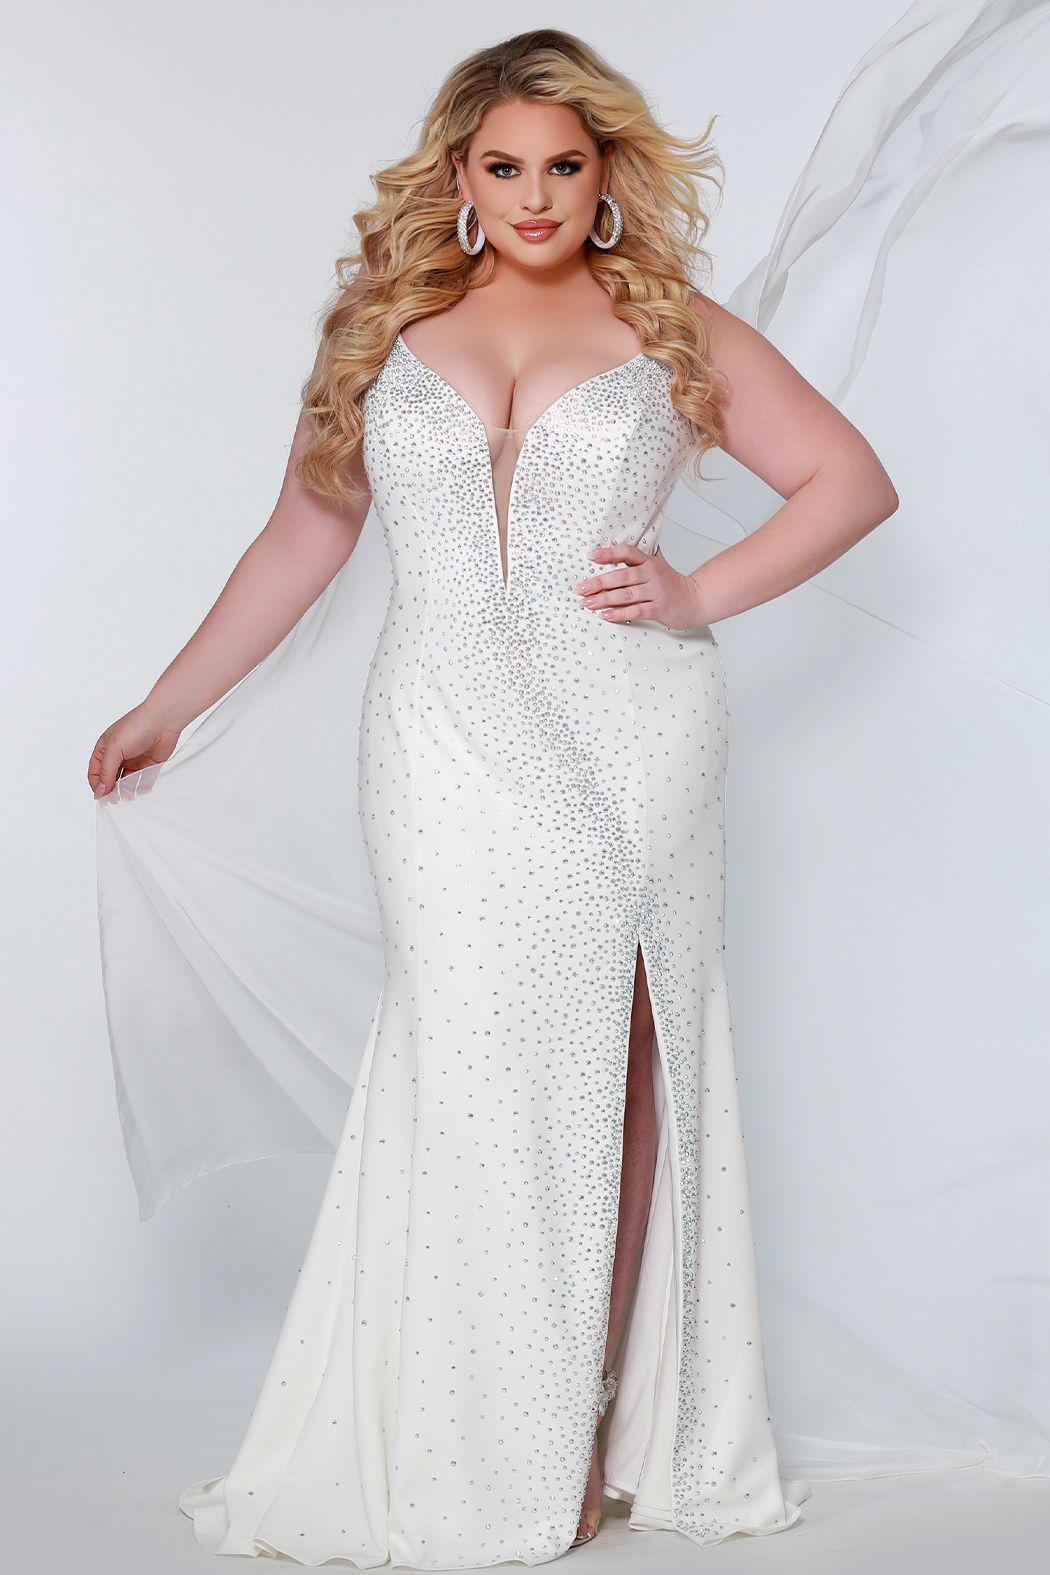 Johnathan Kayne for Sydney's Closet JK2218 Maverick Plus Sized Prom, Pageant and Formal Evening Wear Dress with Cape